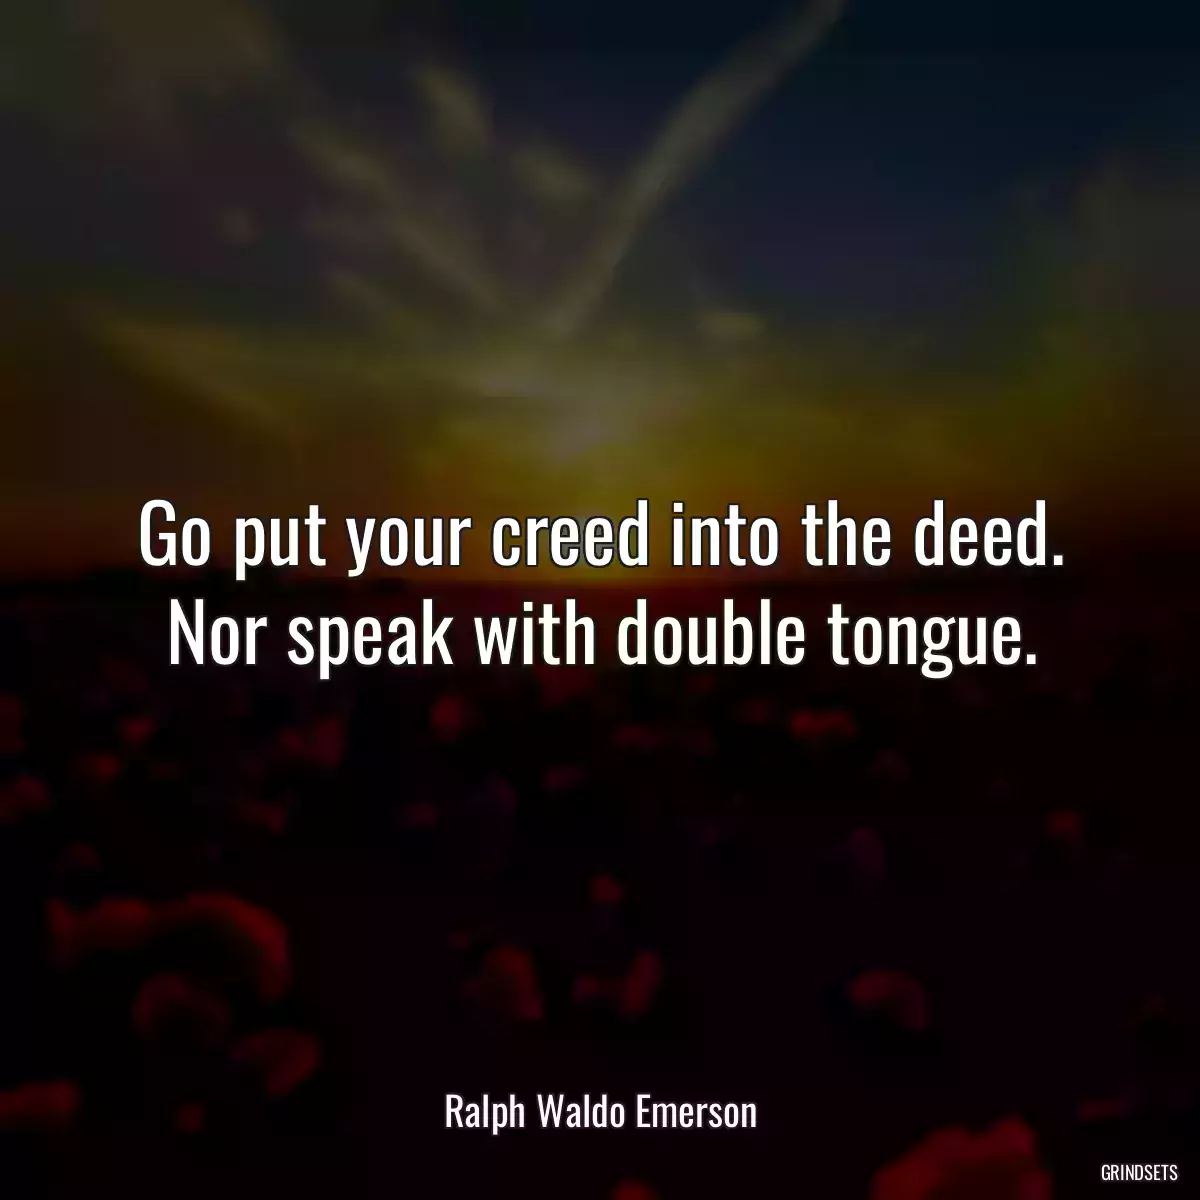 Go put your creed into the deed. Nor speak with double tongue.